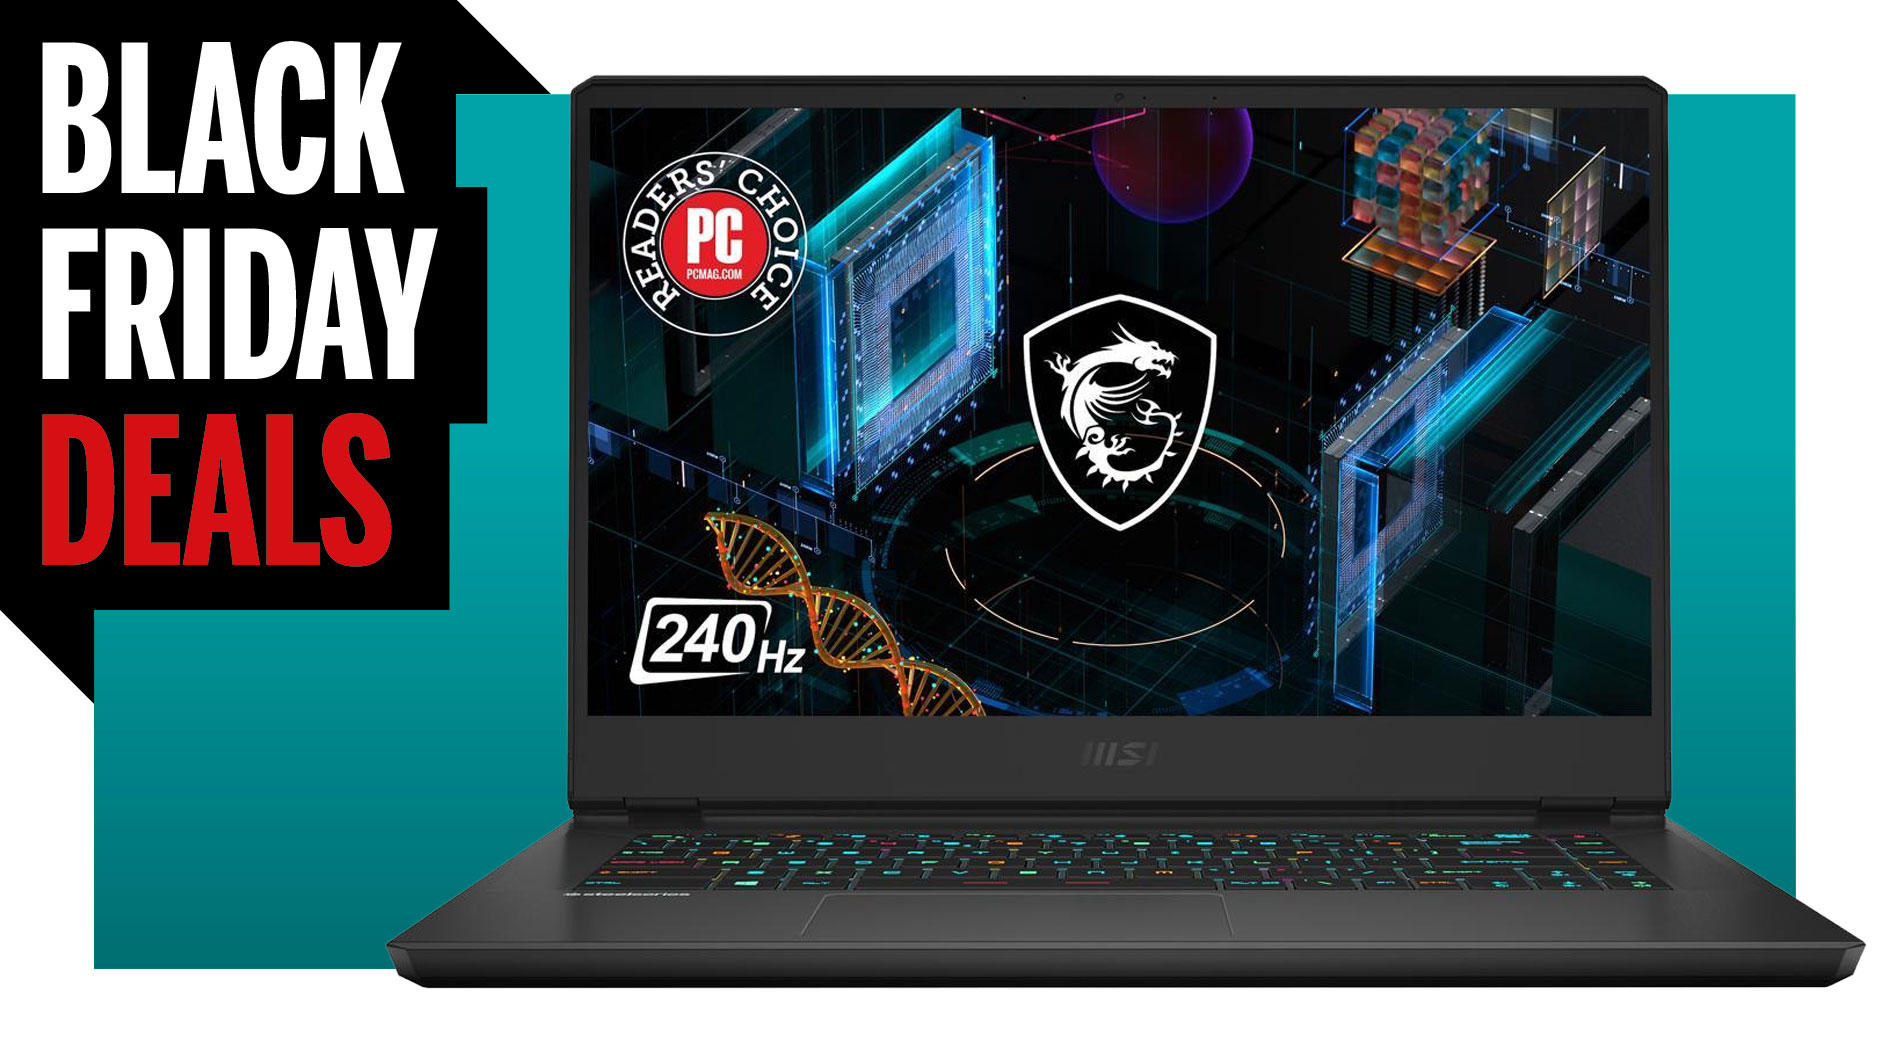 This MSI RTX 3080 Gaming Laptop Is Just 1 799 After Rebate At Newegg 